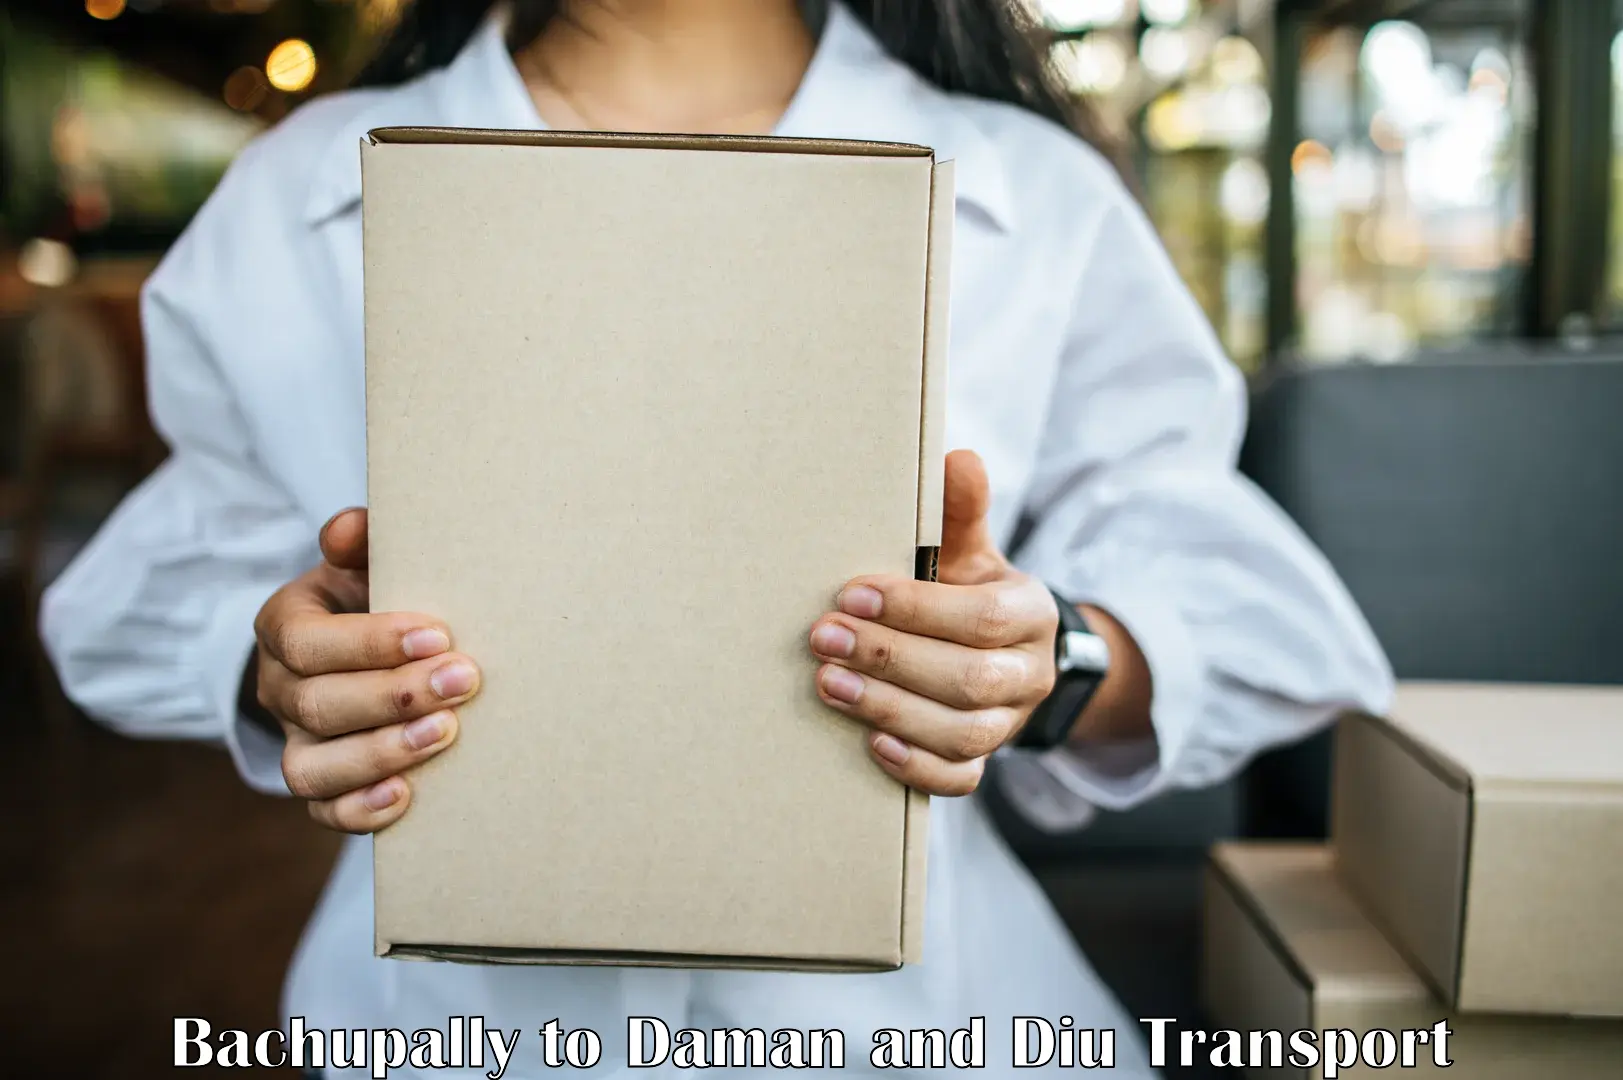 Express transport services Bachupally to Daman and Diu